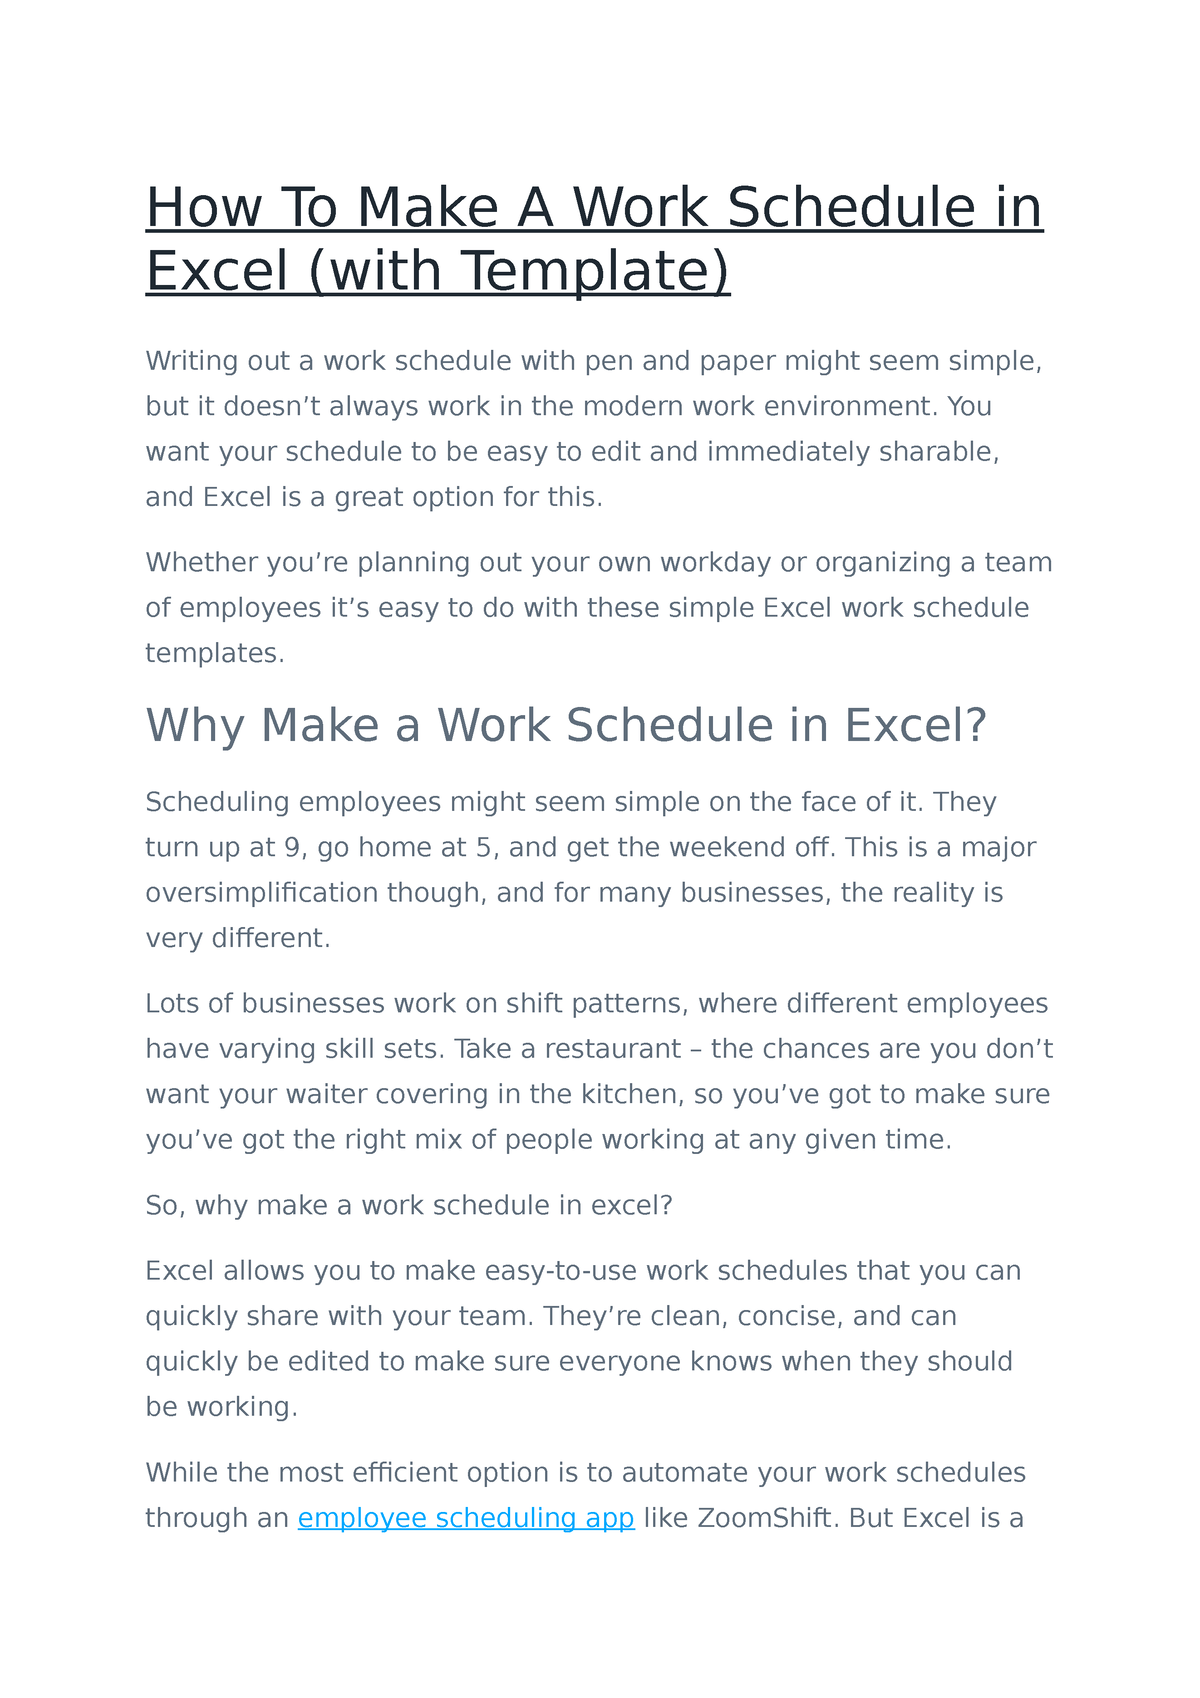 how-to-make-a-work-schedule-in-excel-how-to-make-a-work-schedule-in